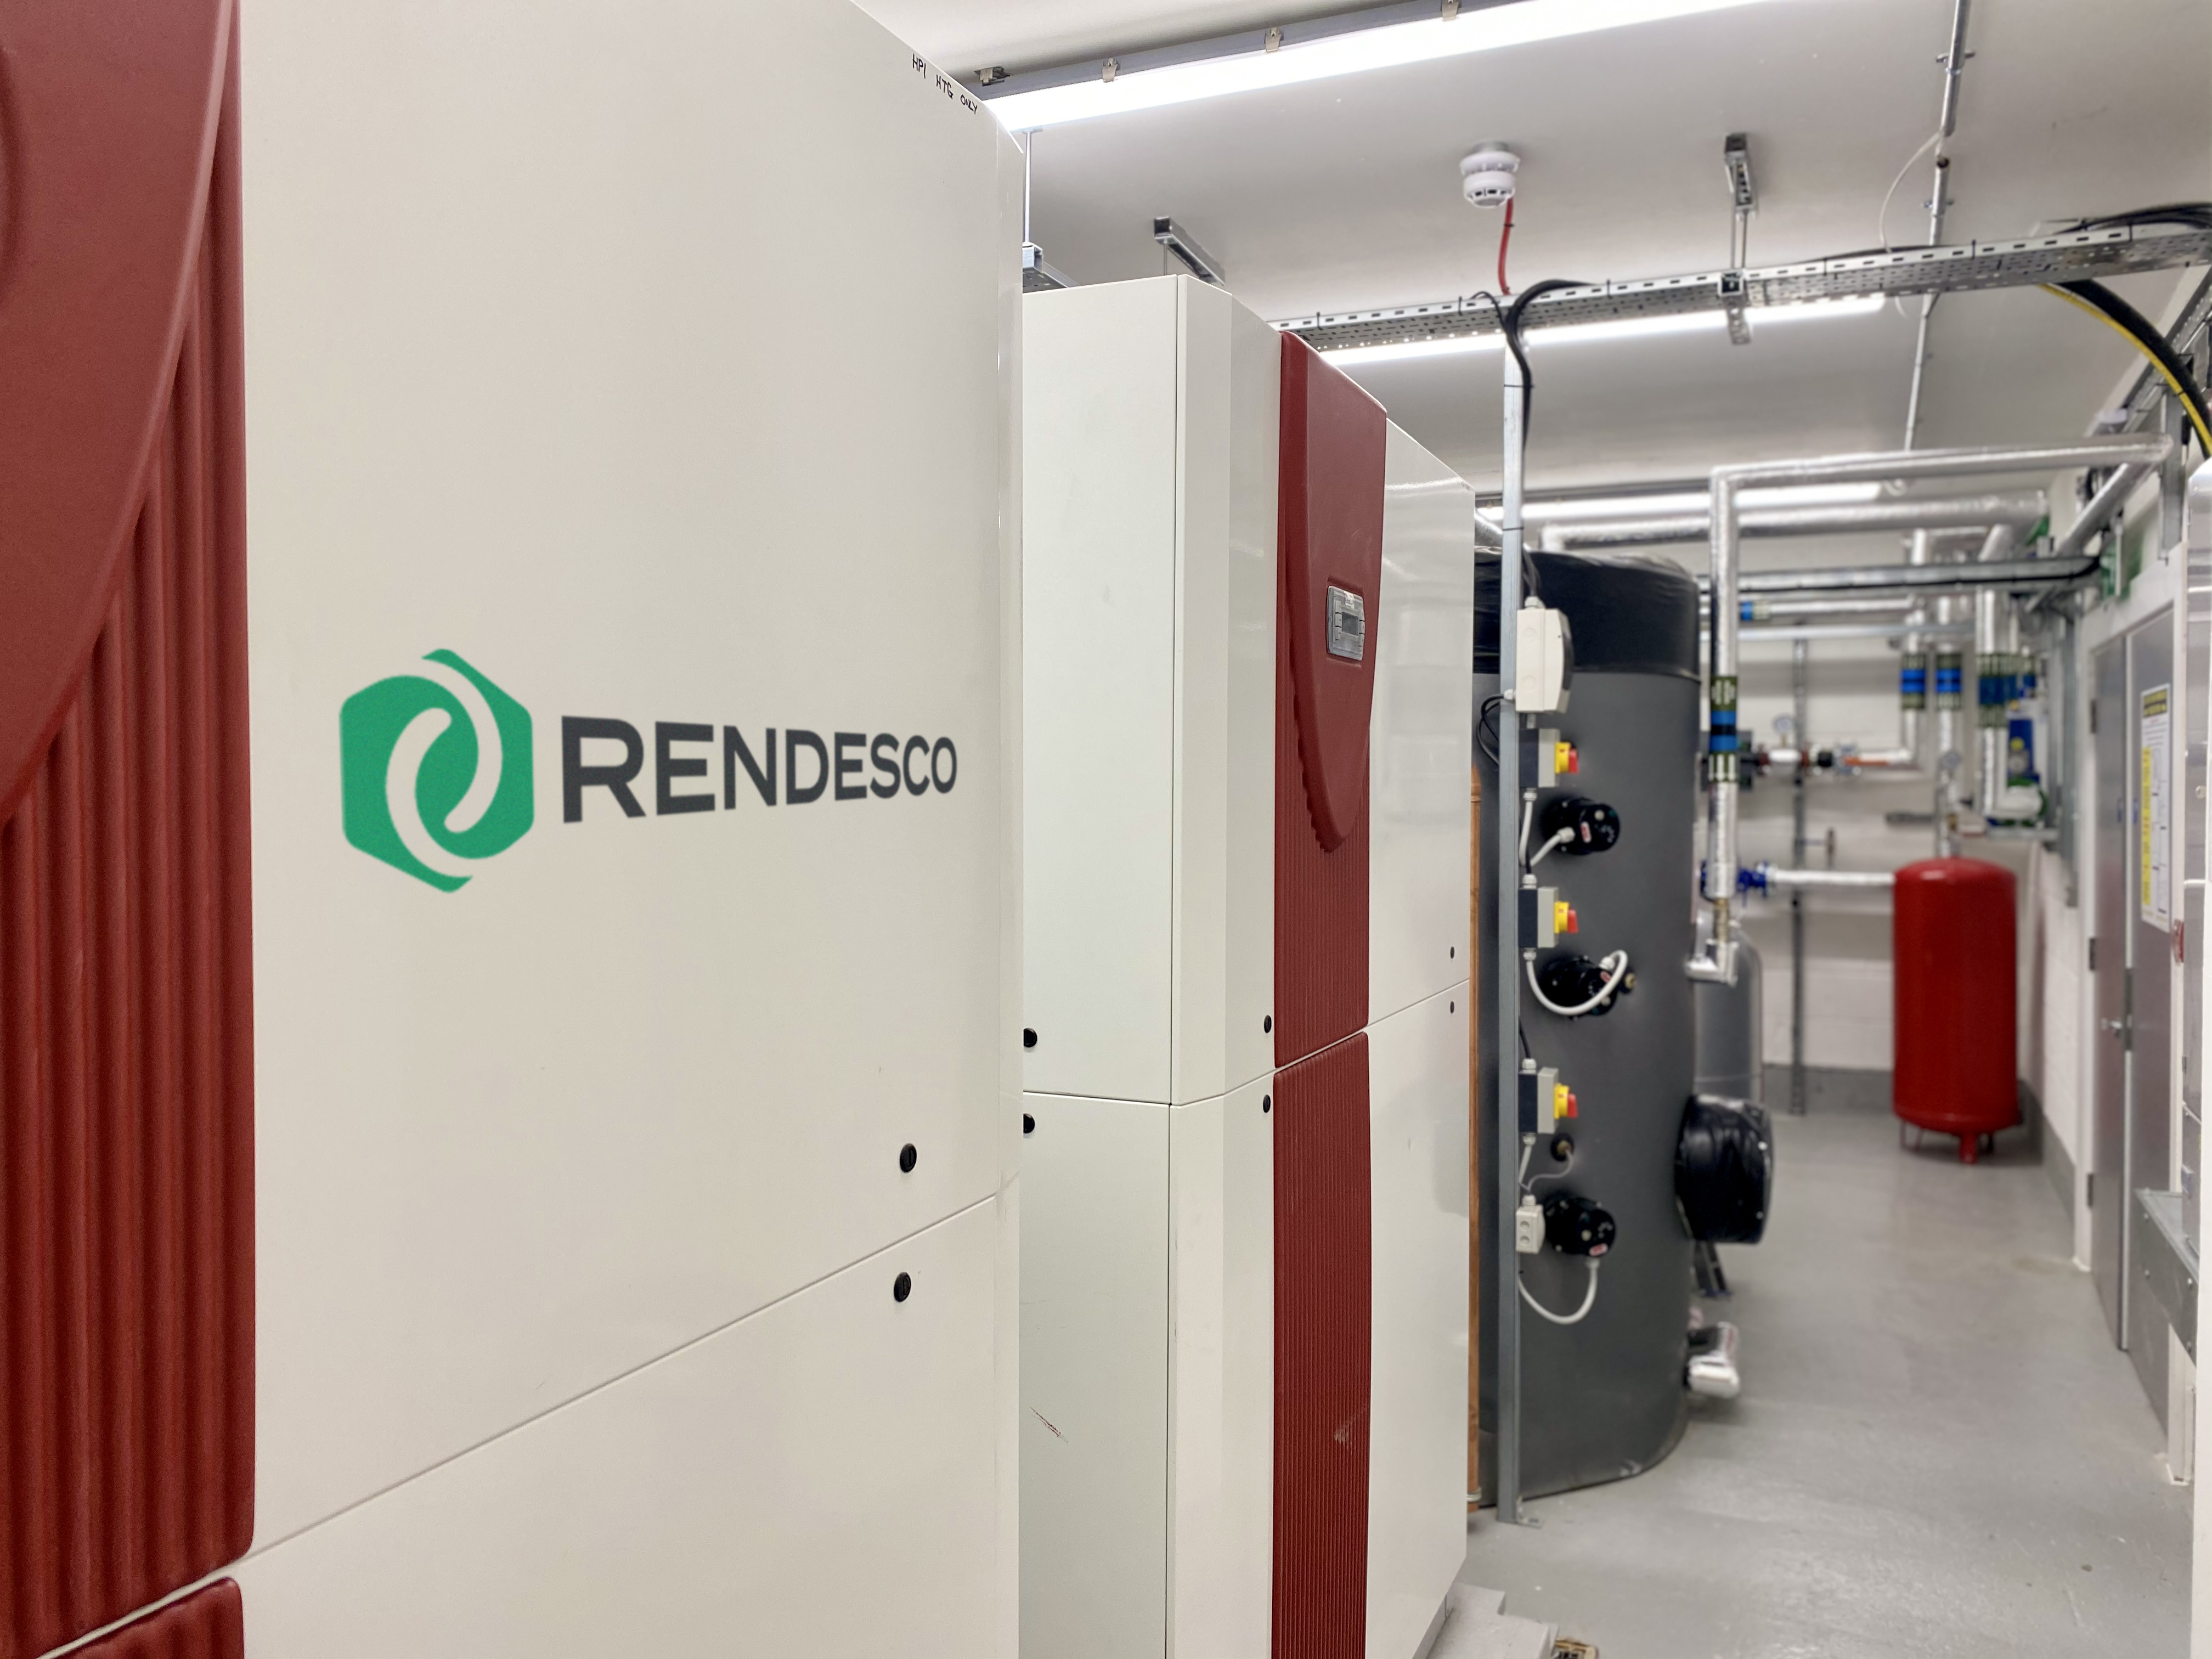 Rendesco raises £6 million to replace gas grids with low-carbon heat